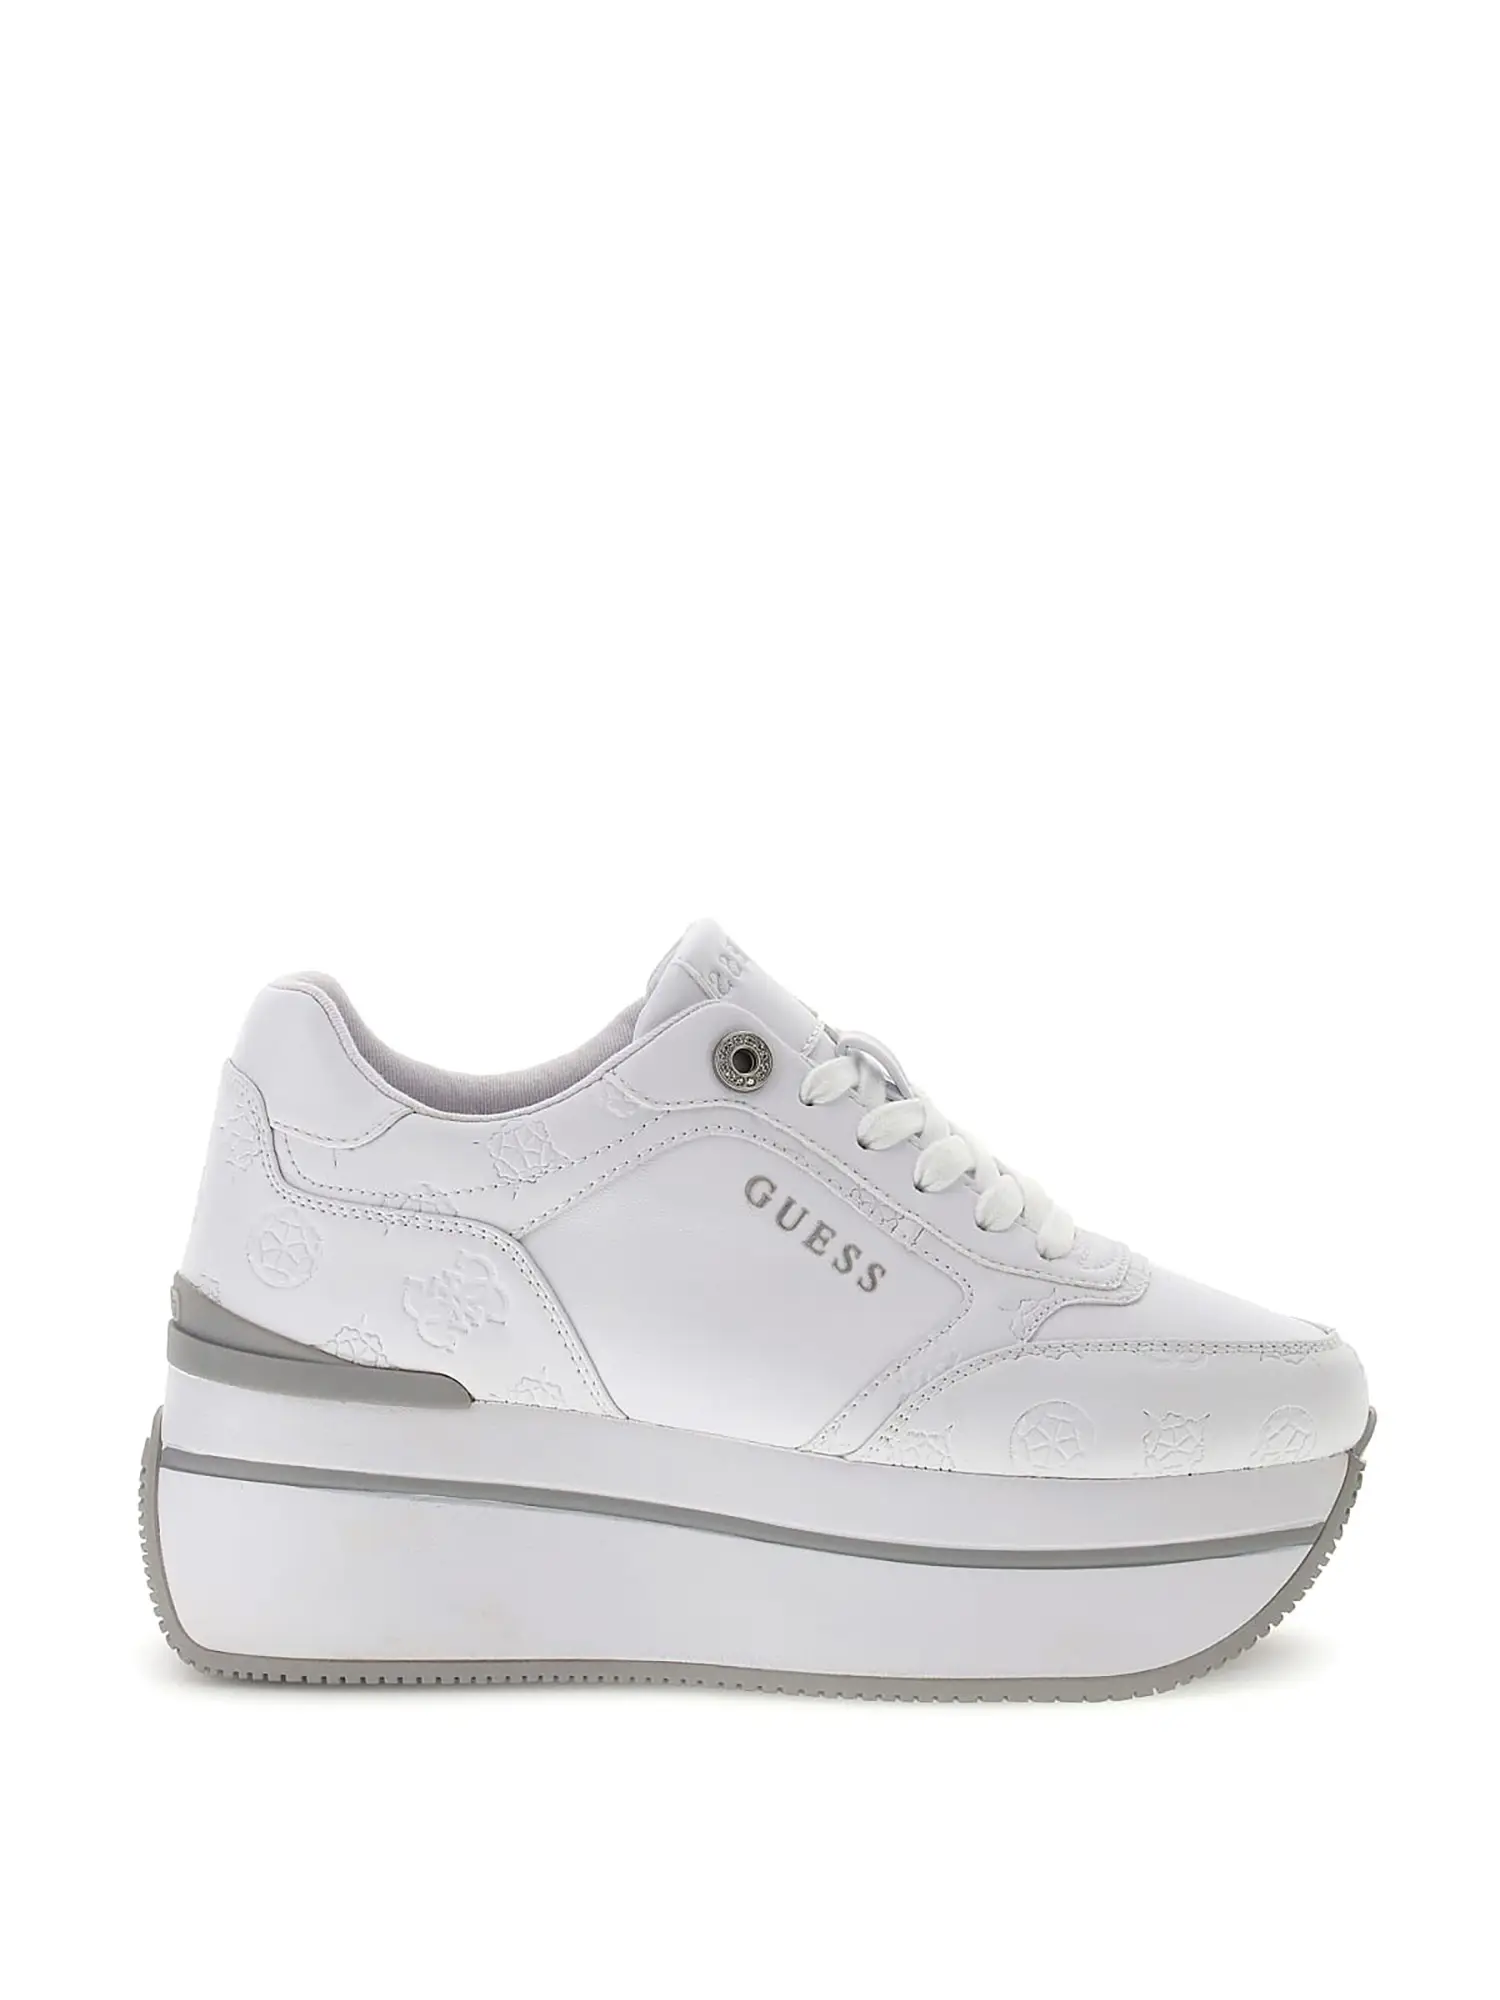 SNEAKERS DONNA - GUESS - FLPCAM FAL12 - BIANCO, 40